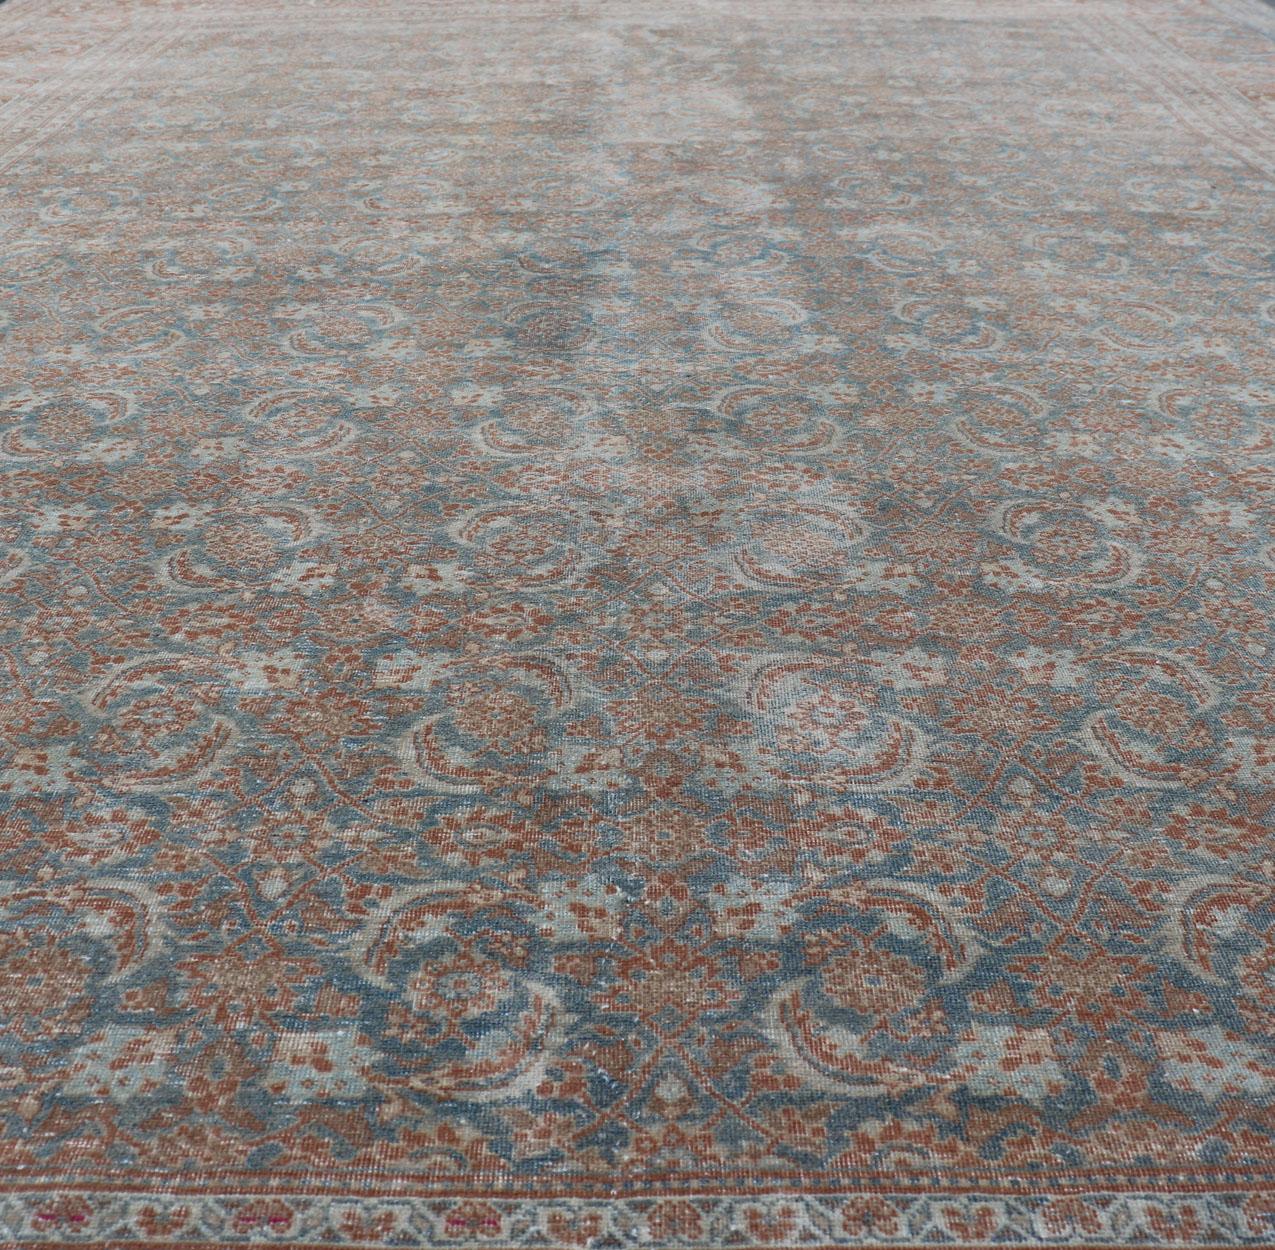 Large Antique Persian Tabriz Carpet with Herati Design in Gray Blue & Orange Red For Sale 3